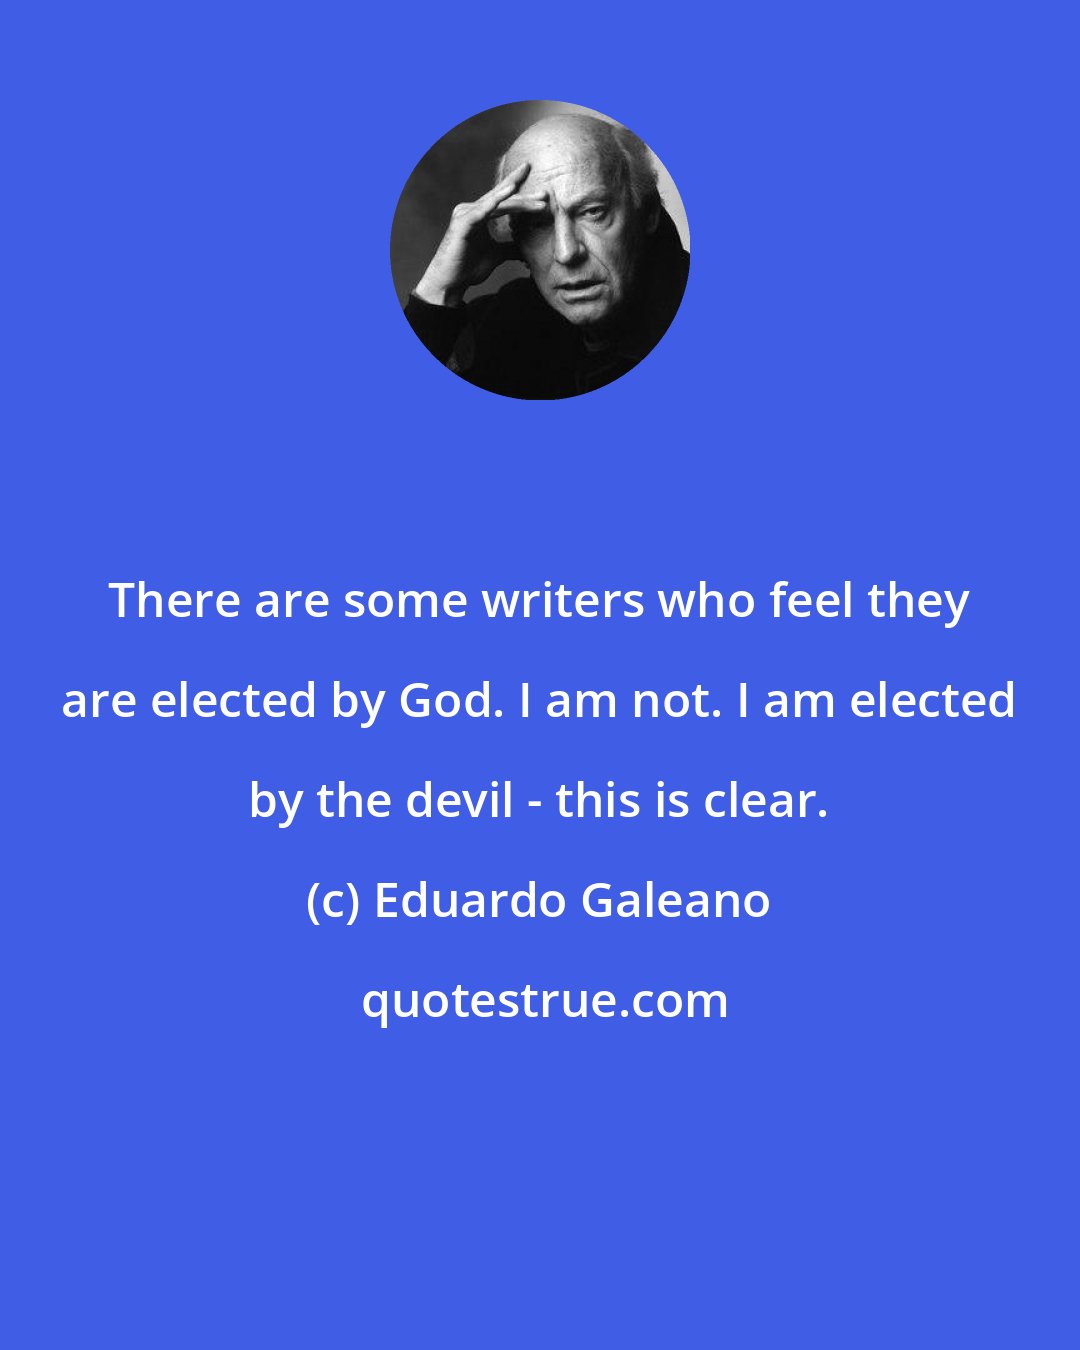 Eduardo Galeano: There are some writers who feel they are elected by God. I am not. I am elected by the devil - this is clear.